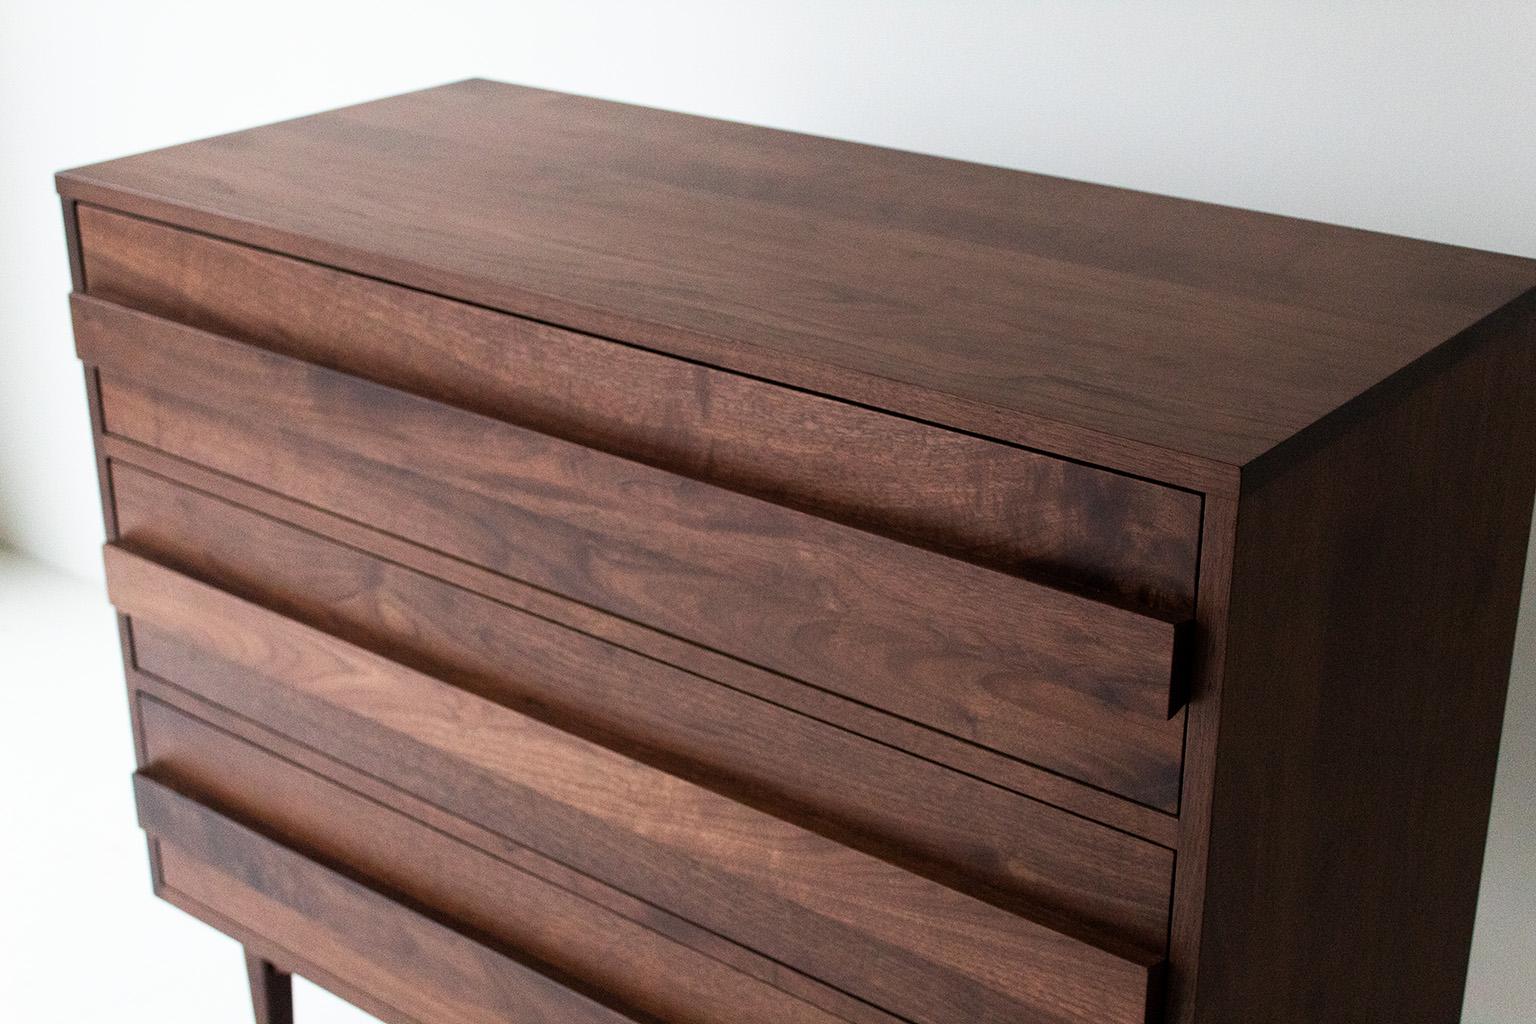 This Modern walnut 3-drawer dresser is made in the heart of Ohio with locally sourced wood. Each piece is hand-made with solid walnut and finished with a beautiful matte commercial grade finish. It is important to us to let the natural beauty of the